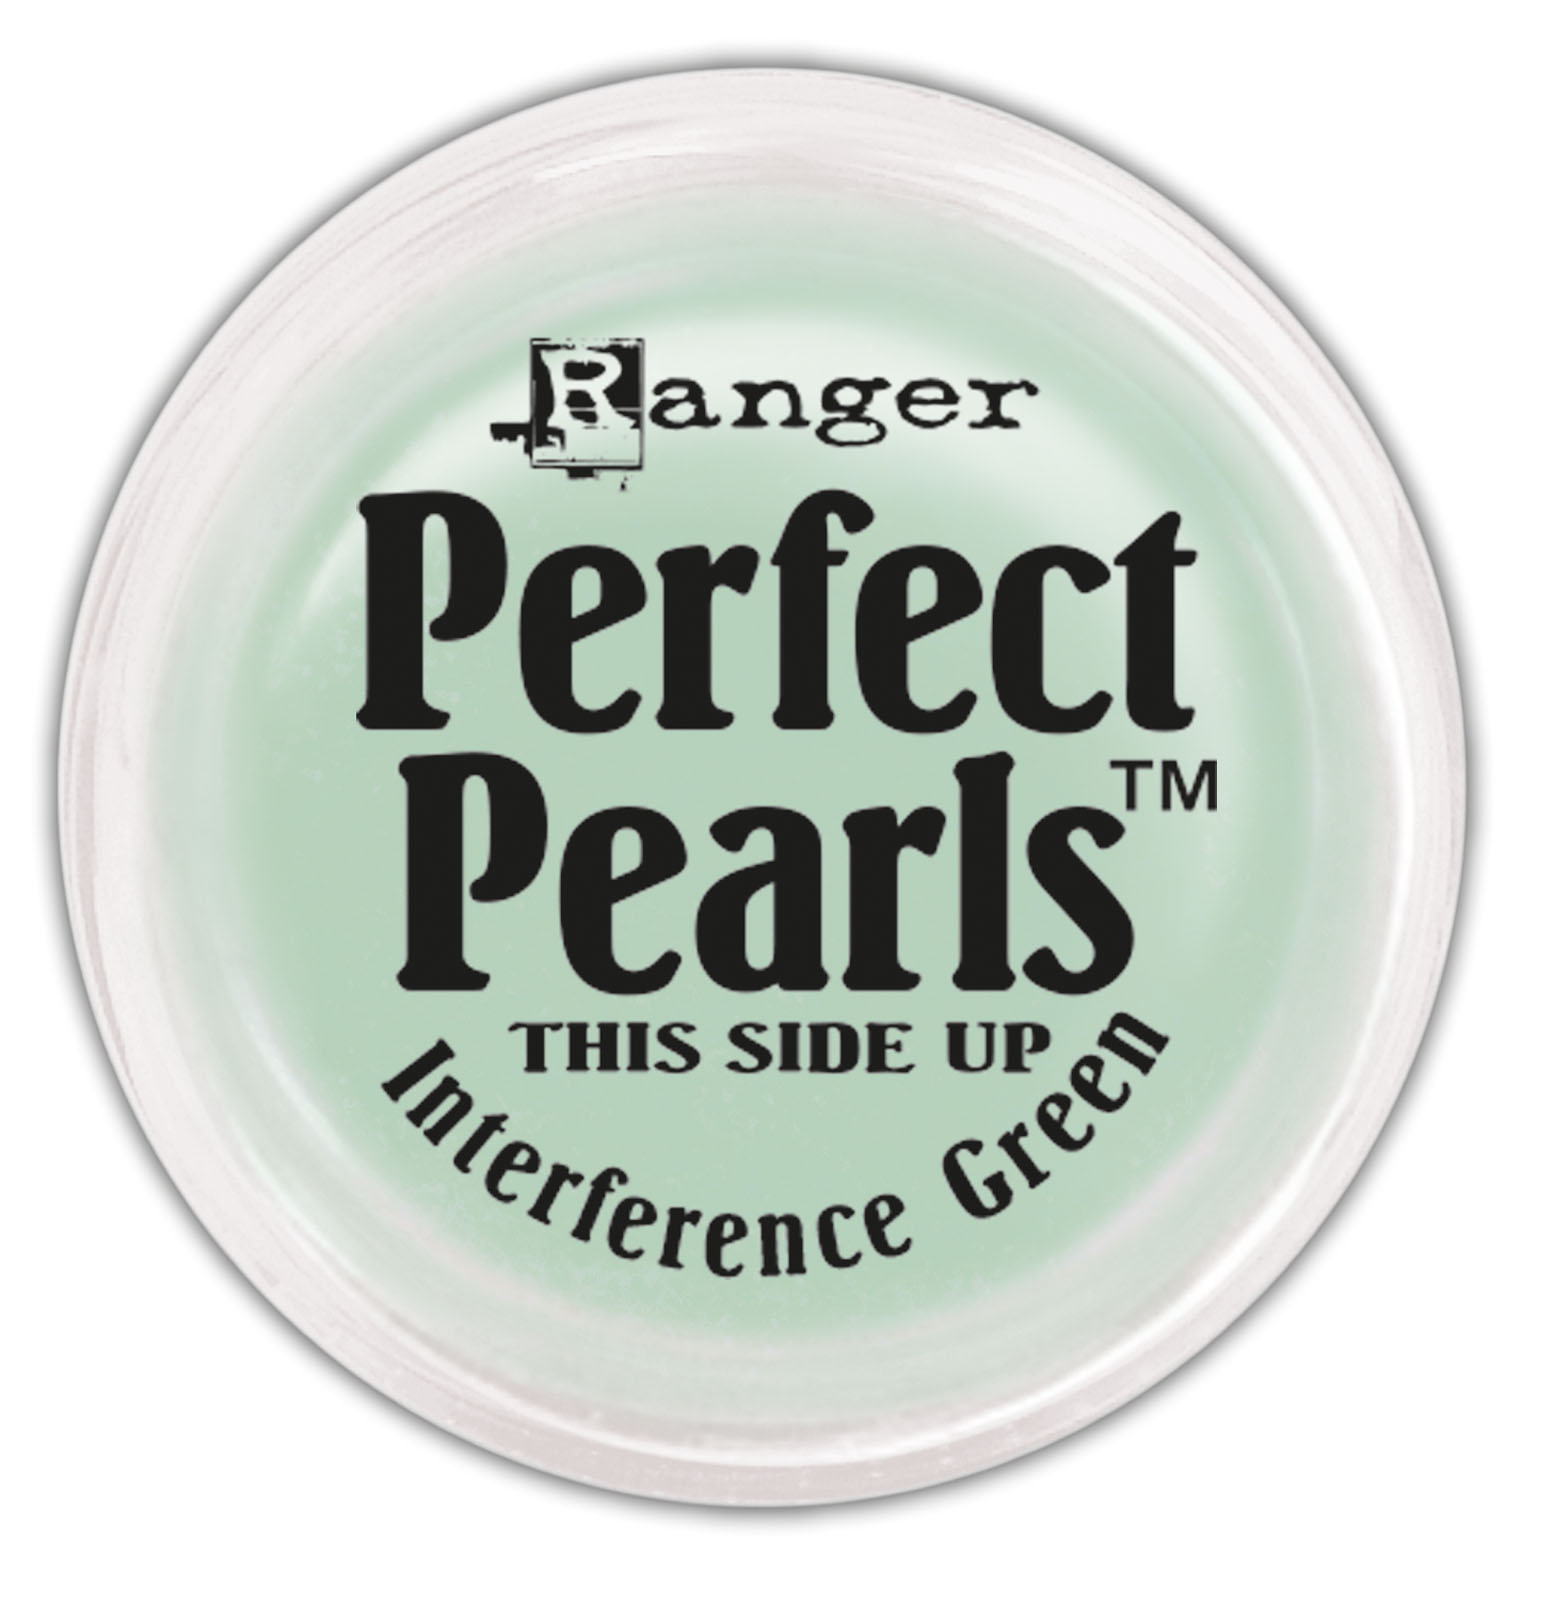 Ranger • Perfect pearls pigment powder Interference green